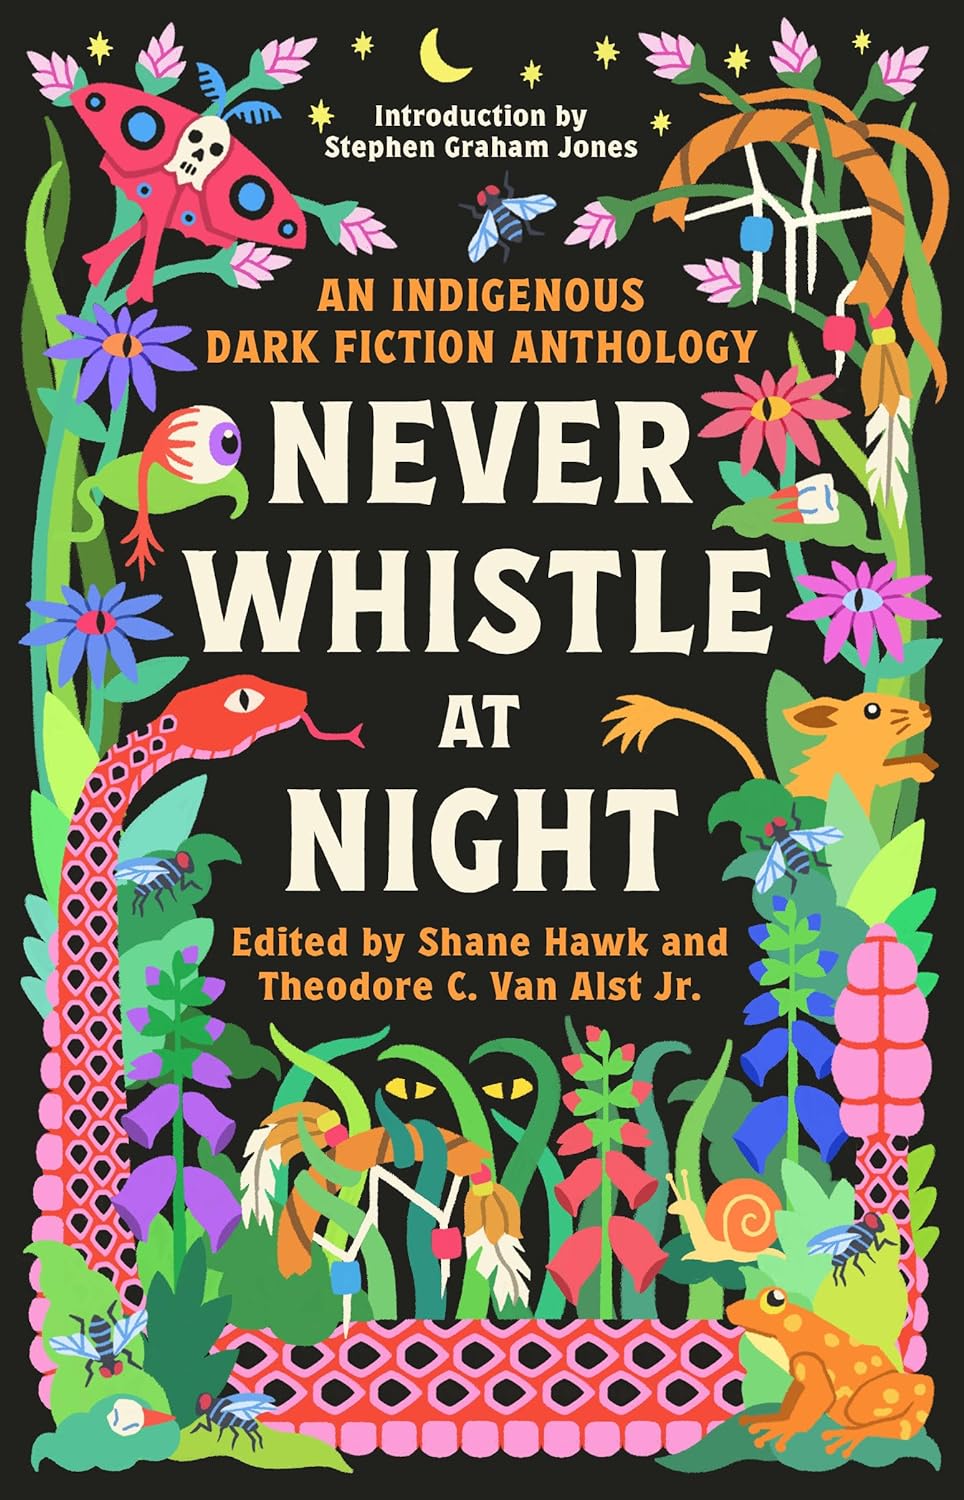 Never Whistle at Night: An Indigenous Dark Fiction Anthology: Are You Ready to Be Un-Settled? - Shane Hawk